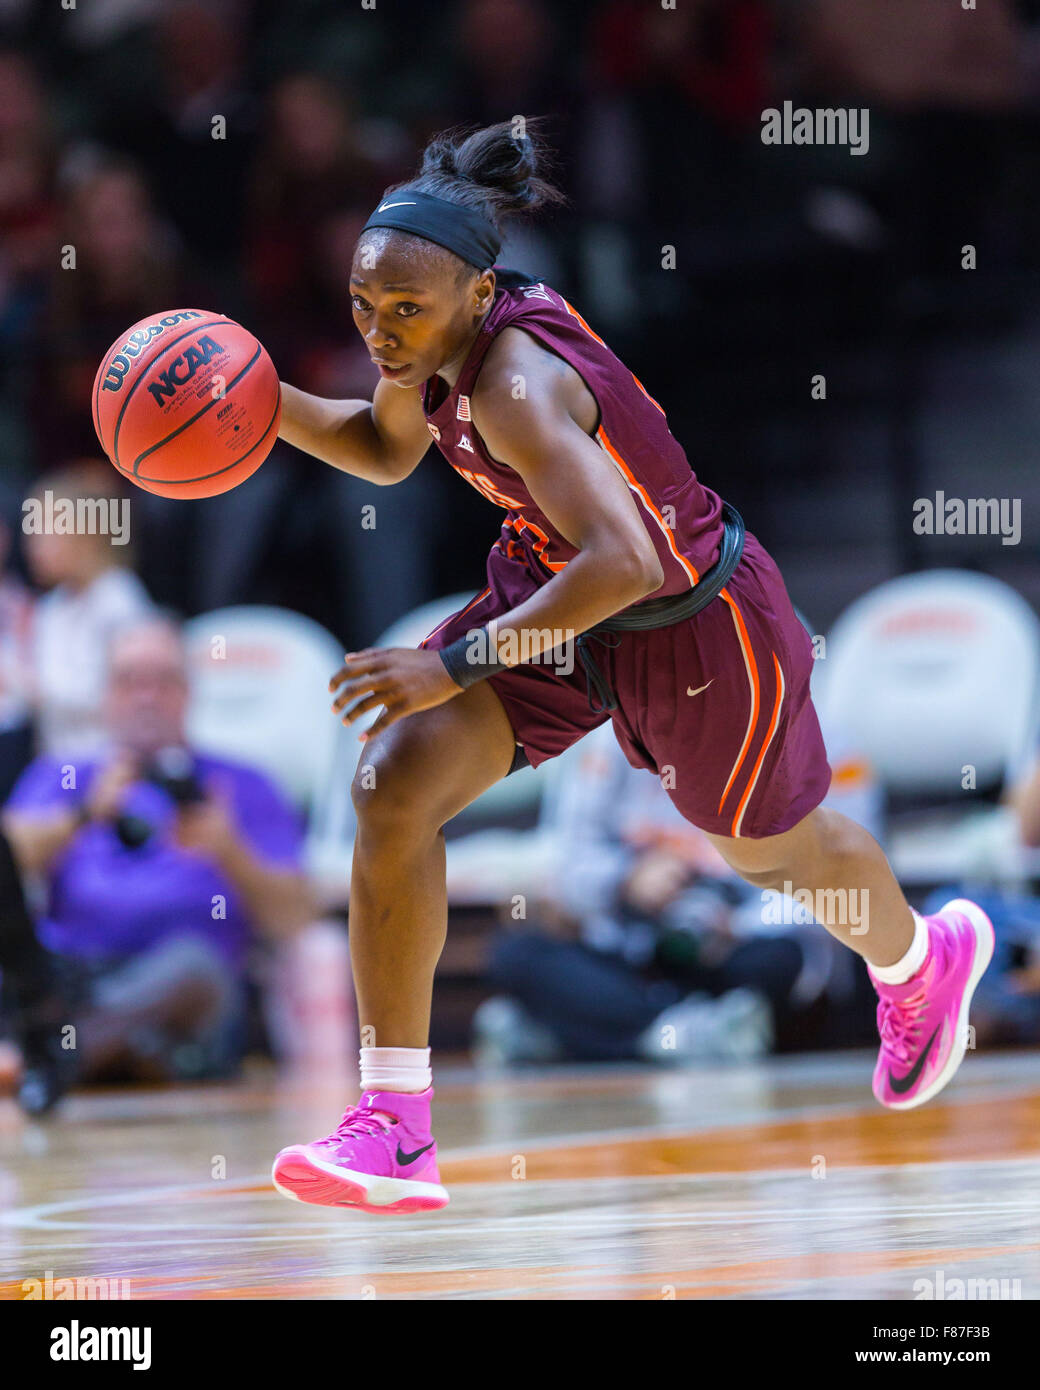 December 6, 2015: Chanette Hicks #12 of the Virginia Tech Hokies brings the ball up court during the NCAA basketball game between the University of Tennessee Lady Volunteers and the Virginia Tech Hokies at Thompson Boling Arena in Knoxville TN Tim Gangloff/CSM Stock Photo